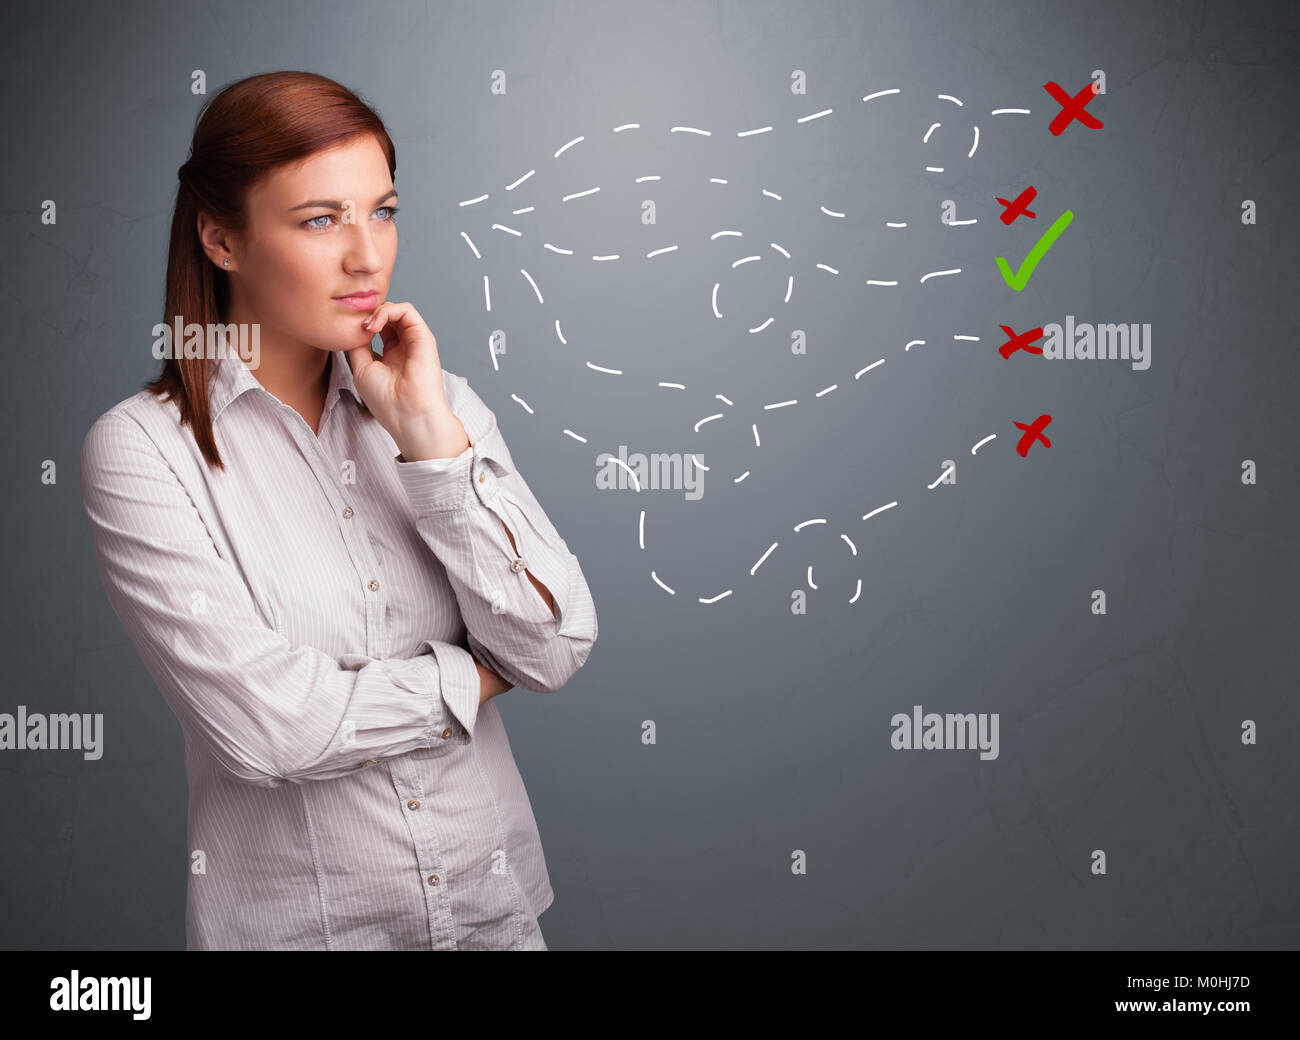 Beautiful young woman choosing between right and wrong signs Stock Photo